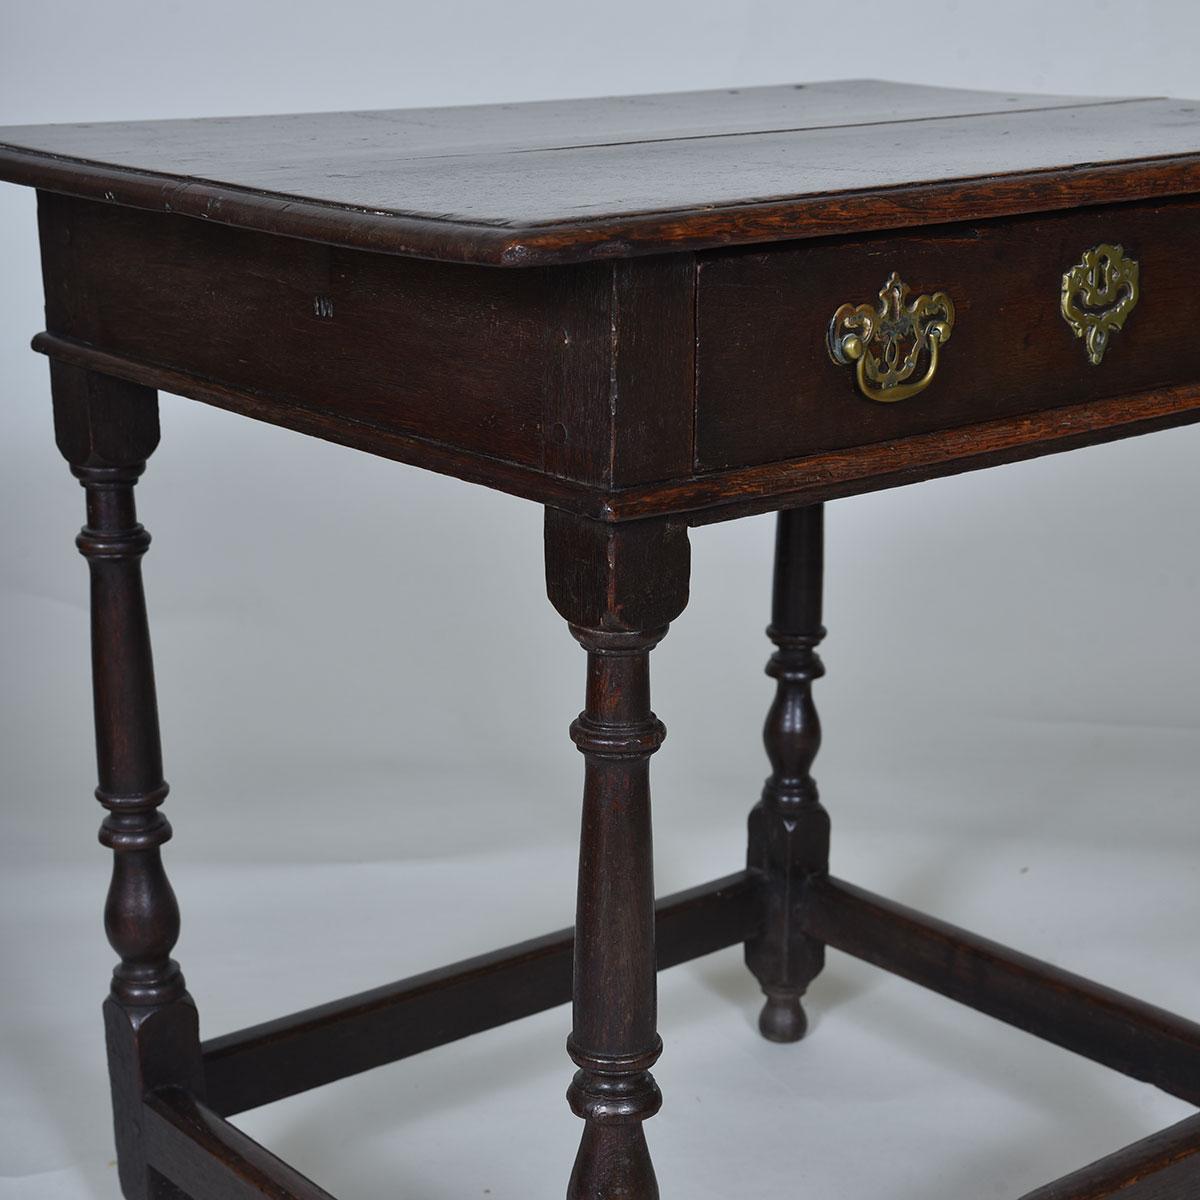 Late 17th/Early 18th century Oak Side Table